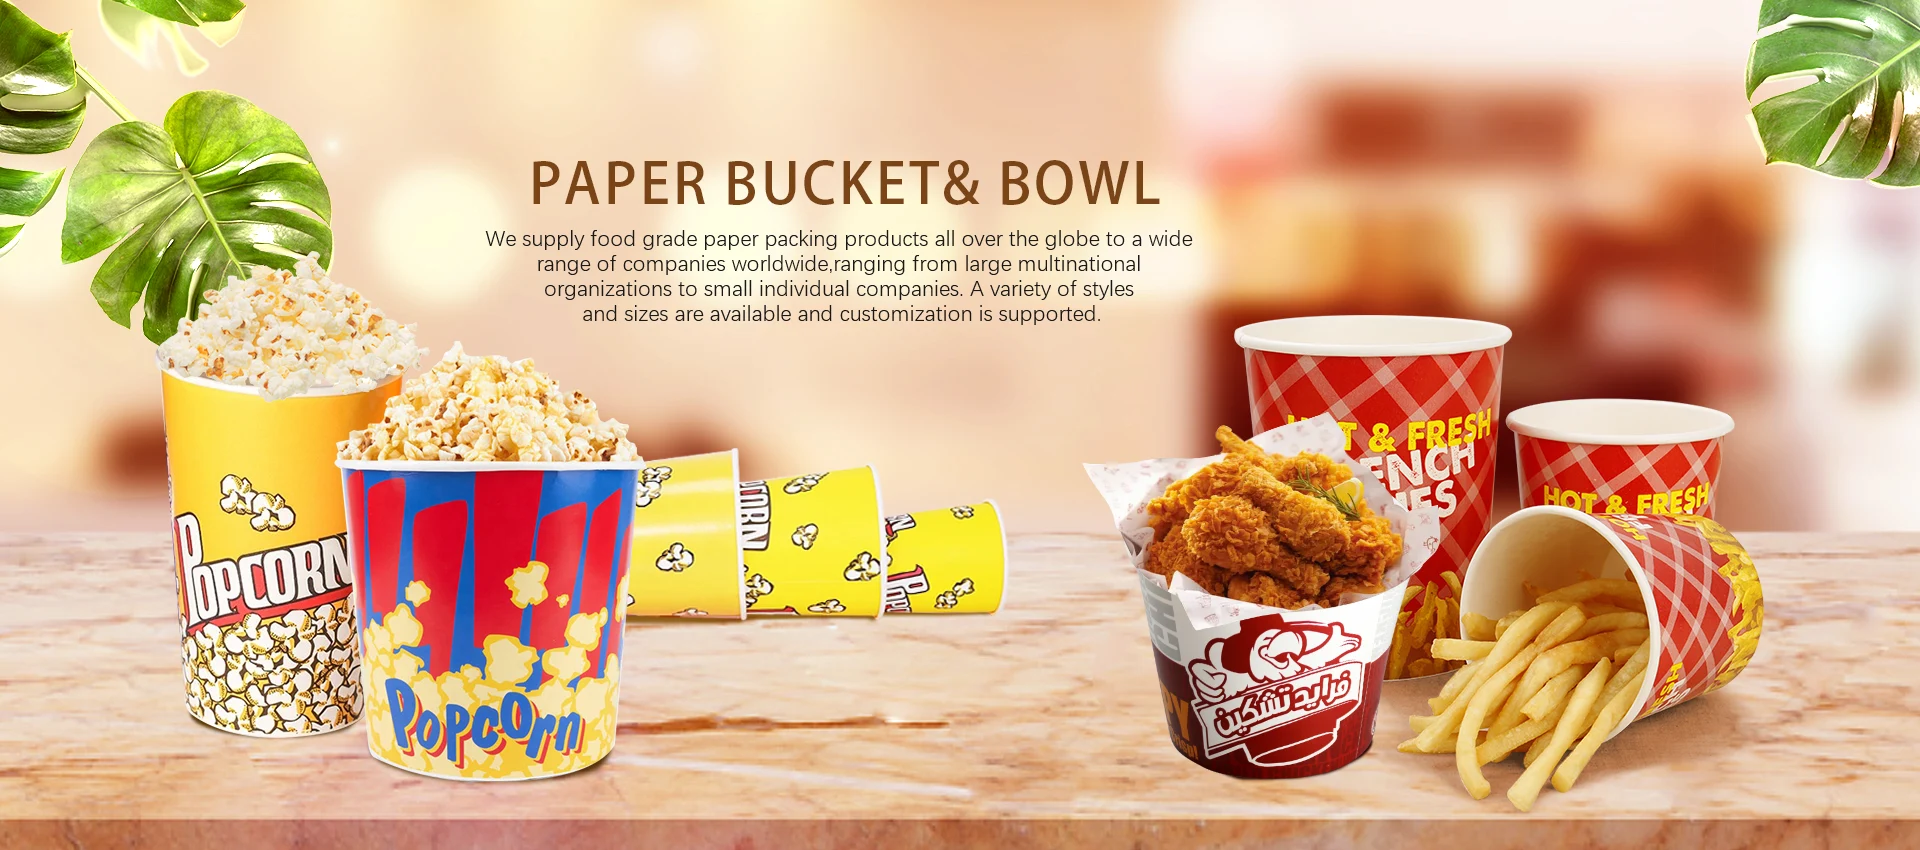 Paper Bucket and Bowl Suppliers